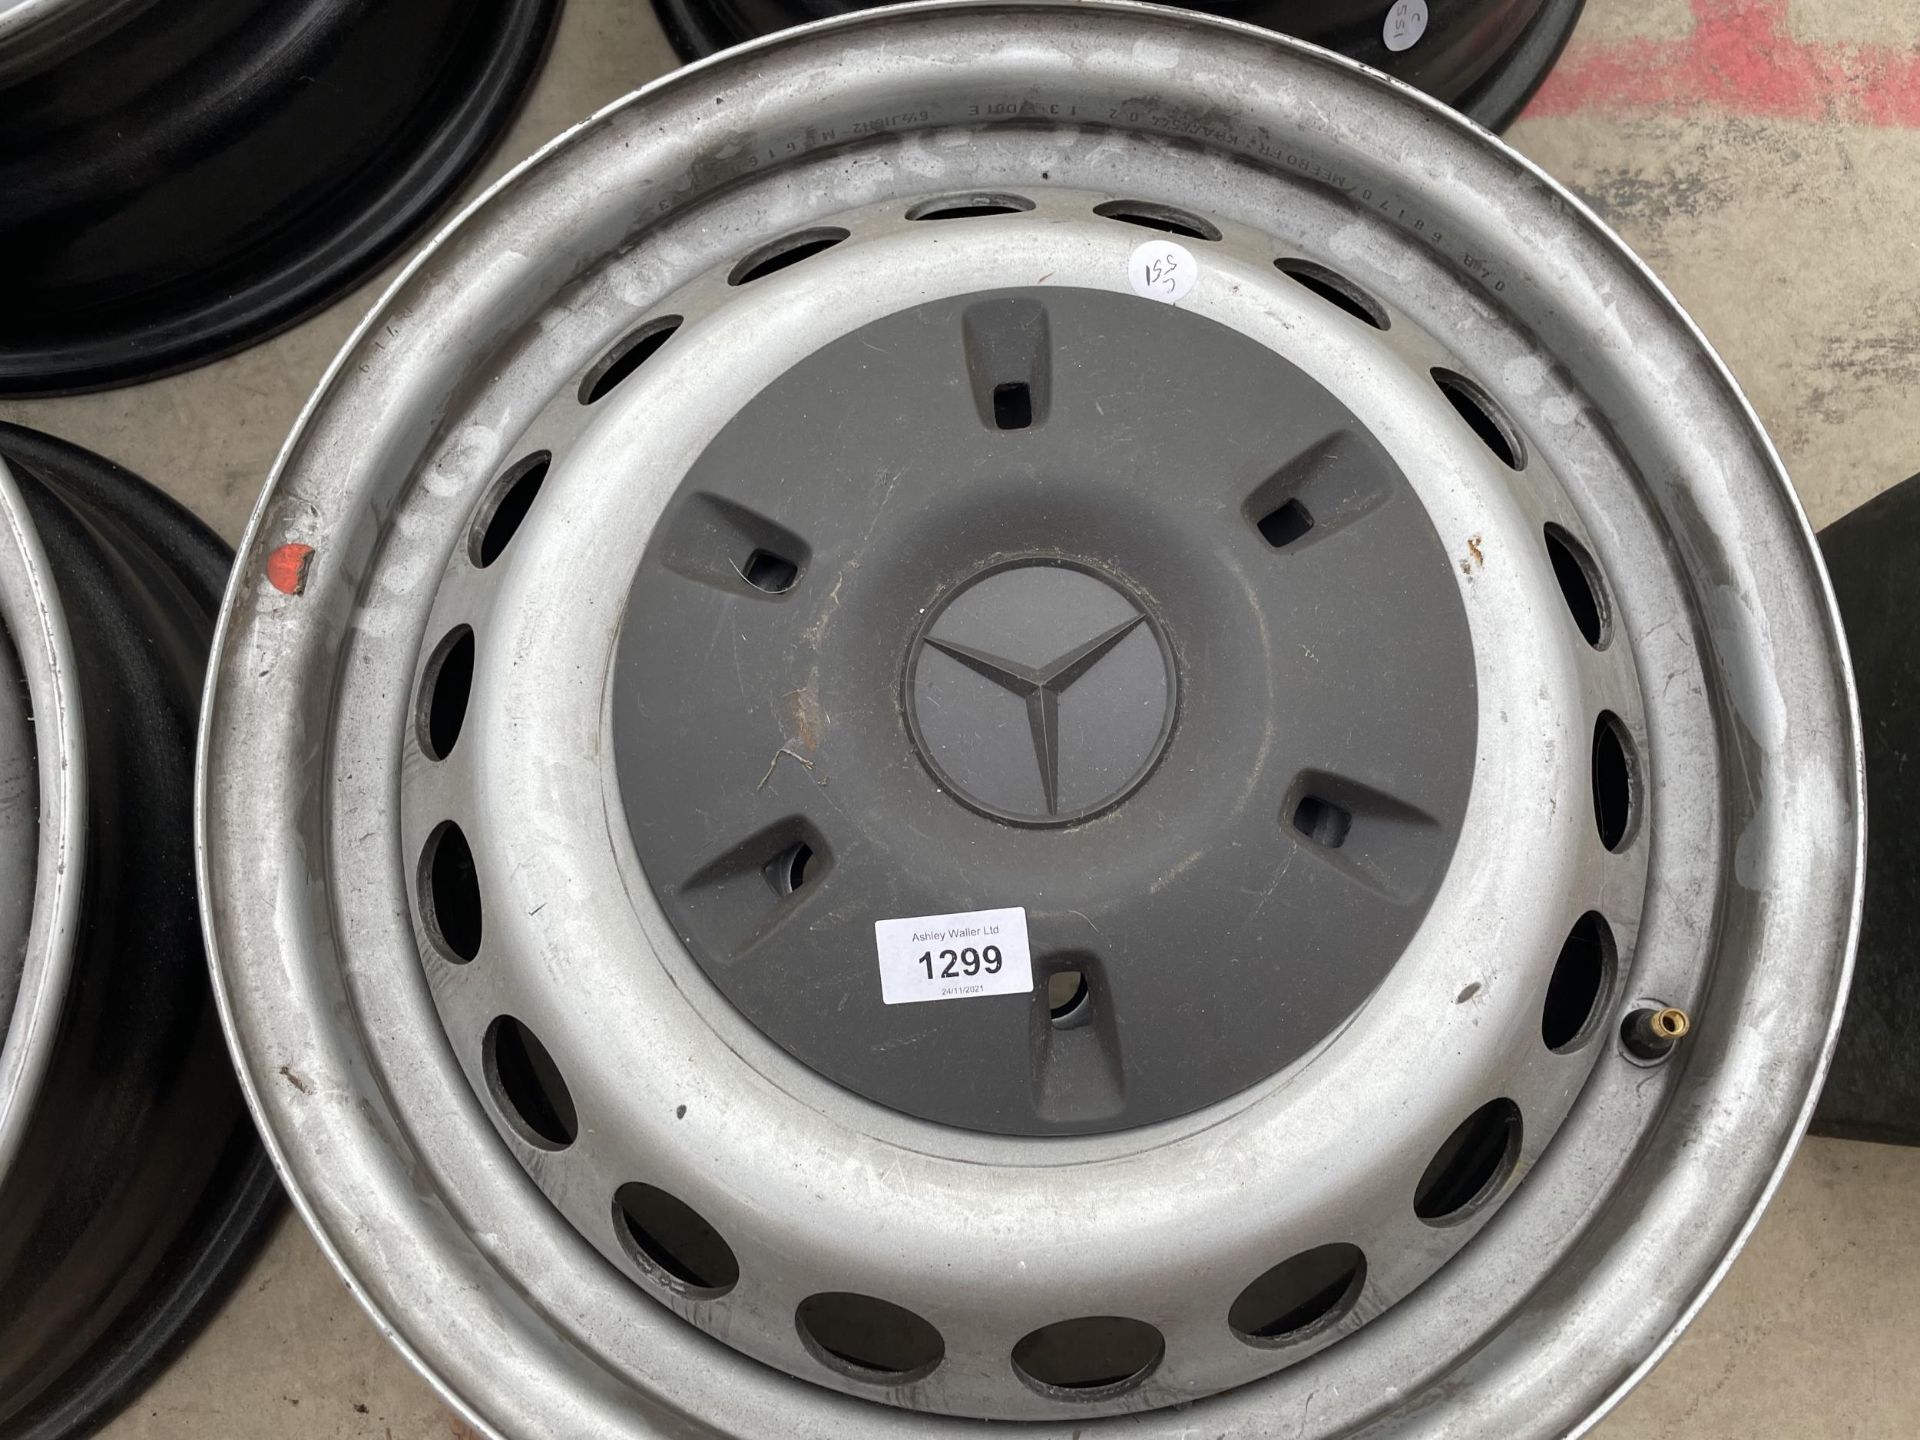 A SET OF FOUR CAR RIMS WITH MERCADES CAPS - Image 2 of 3